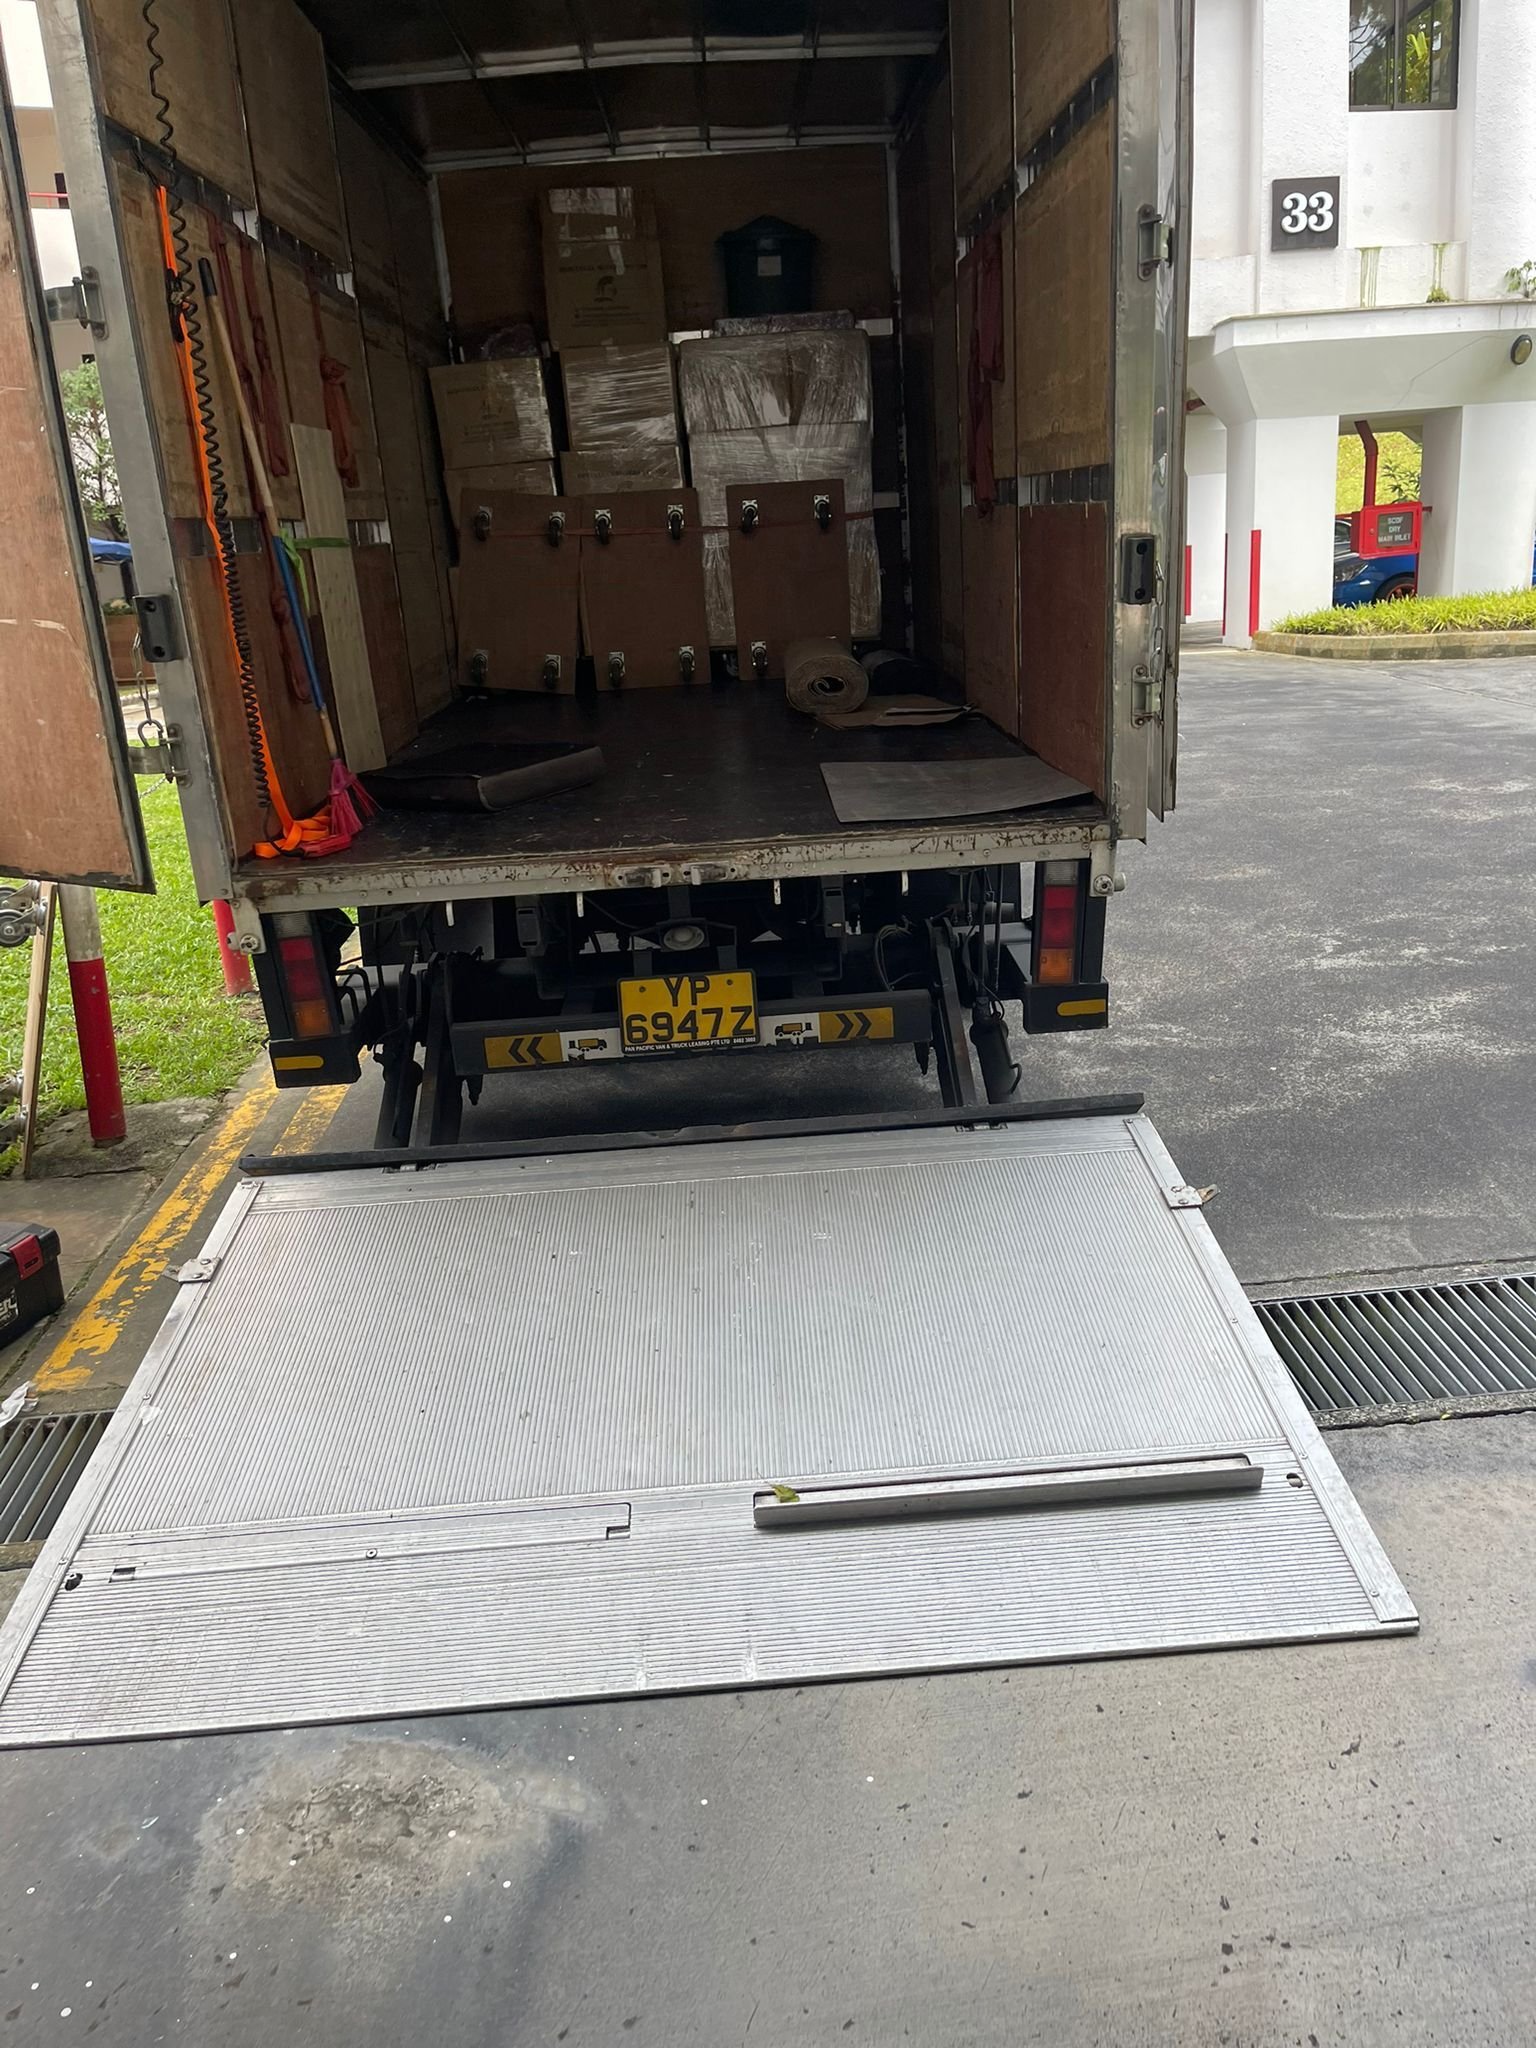 Unloading of items from lorry